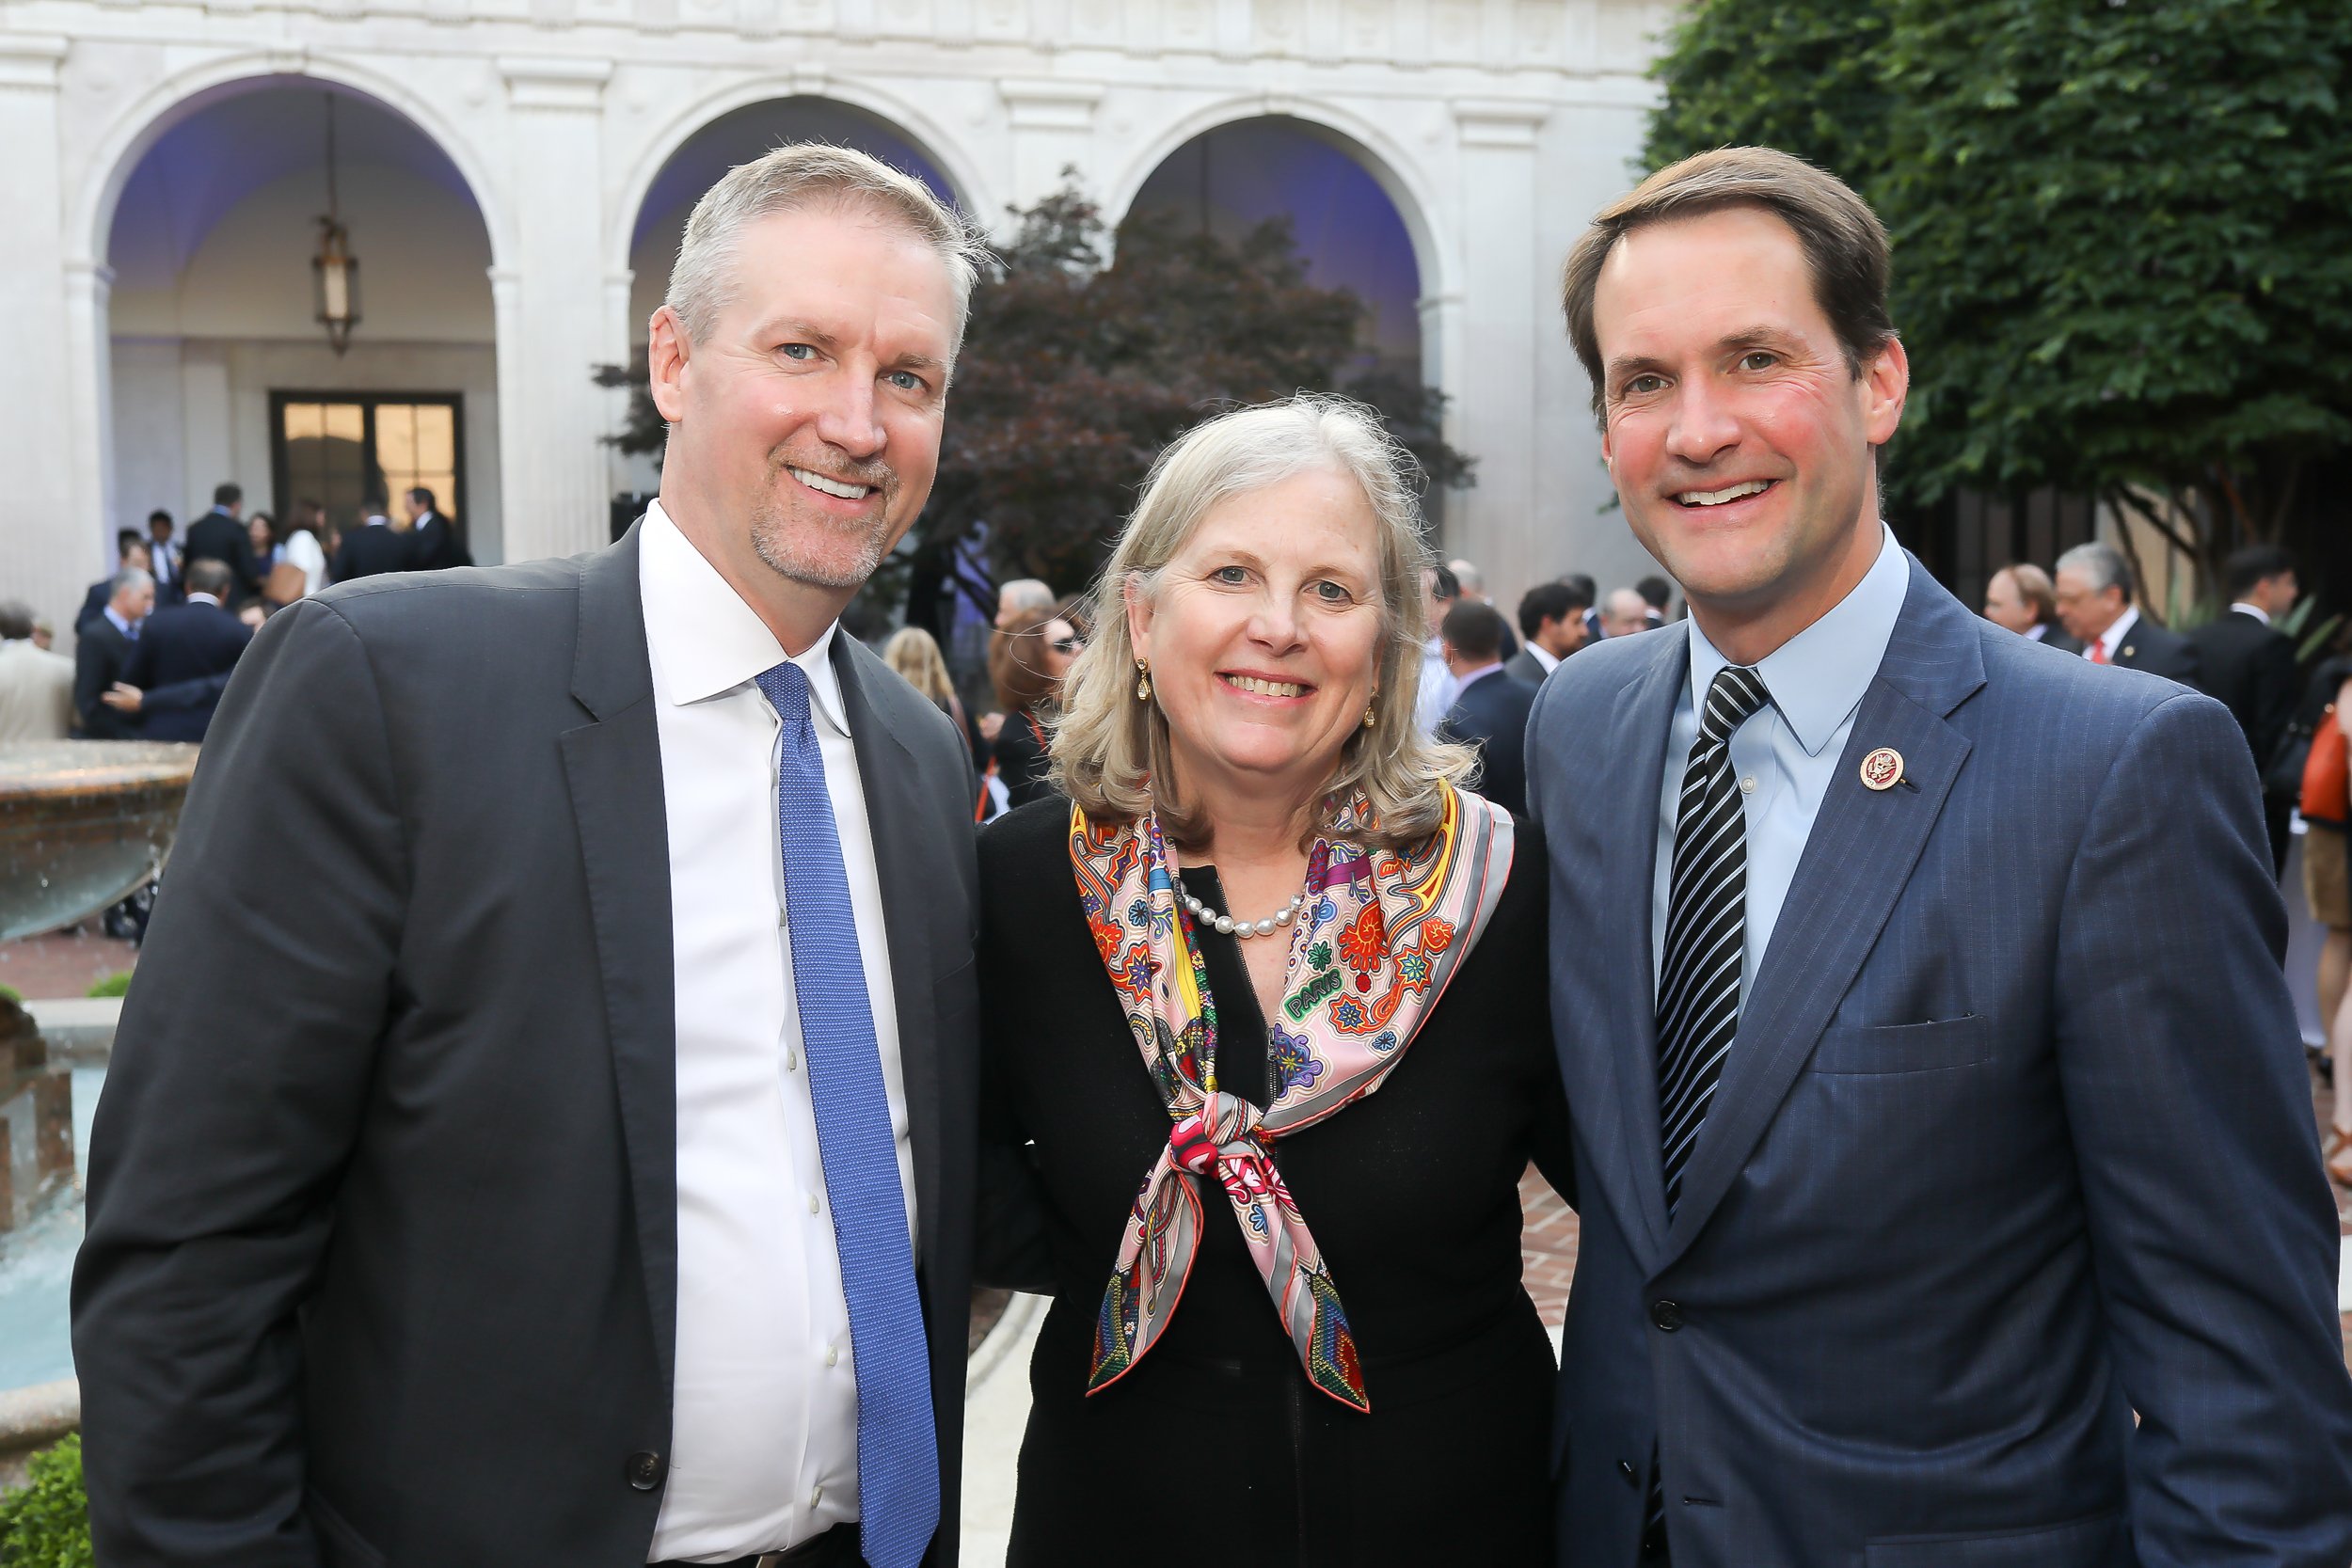 Jim Hock of PSP Partners and former Chief of Staff to Sec. Penny Pritzker, DAS Diane Farrell, and Connecticut Congressman Jim Himes.